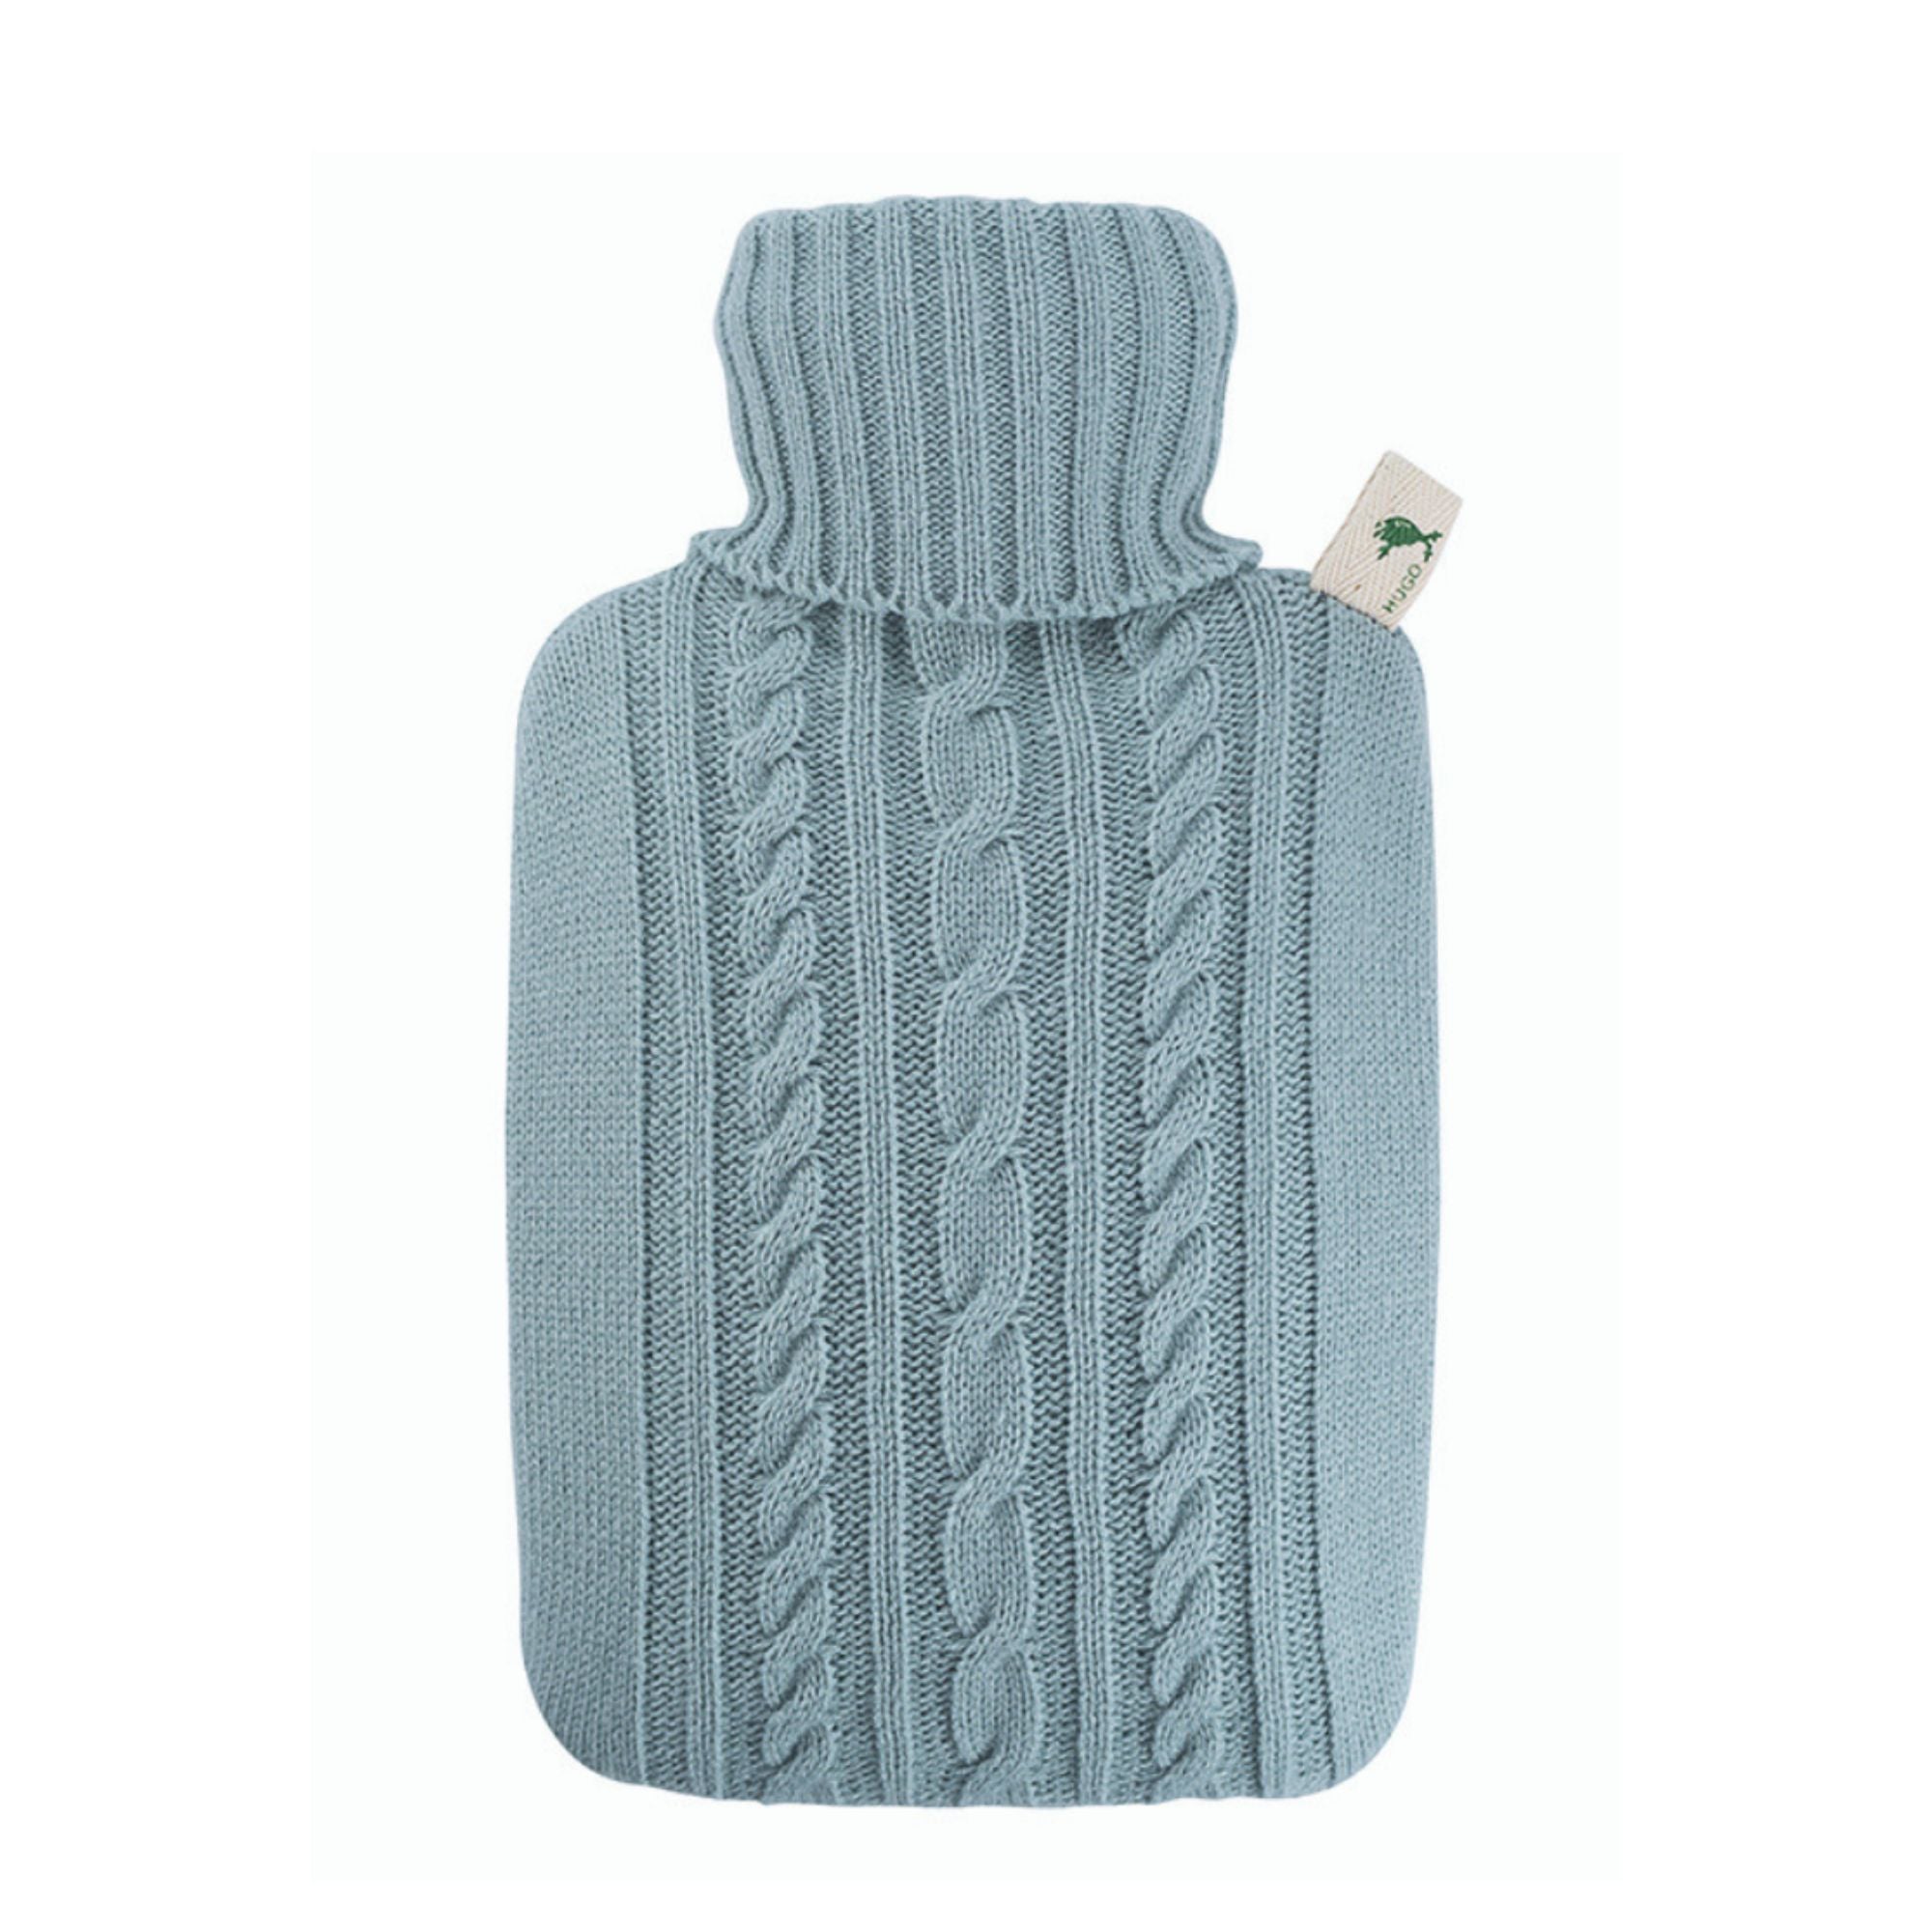 1.8 Litre Hot Water Bottle with Knitted Pastel Blue Cover (rubberless)